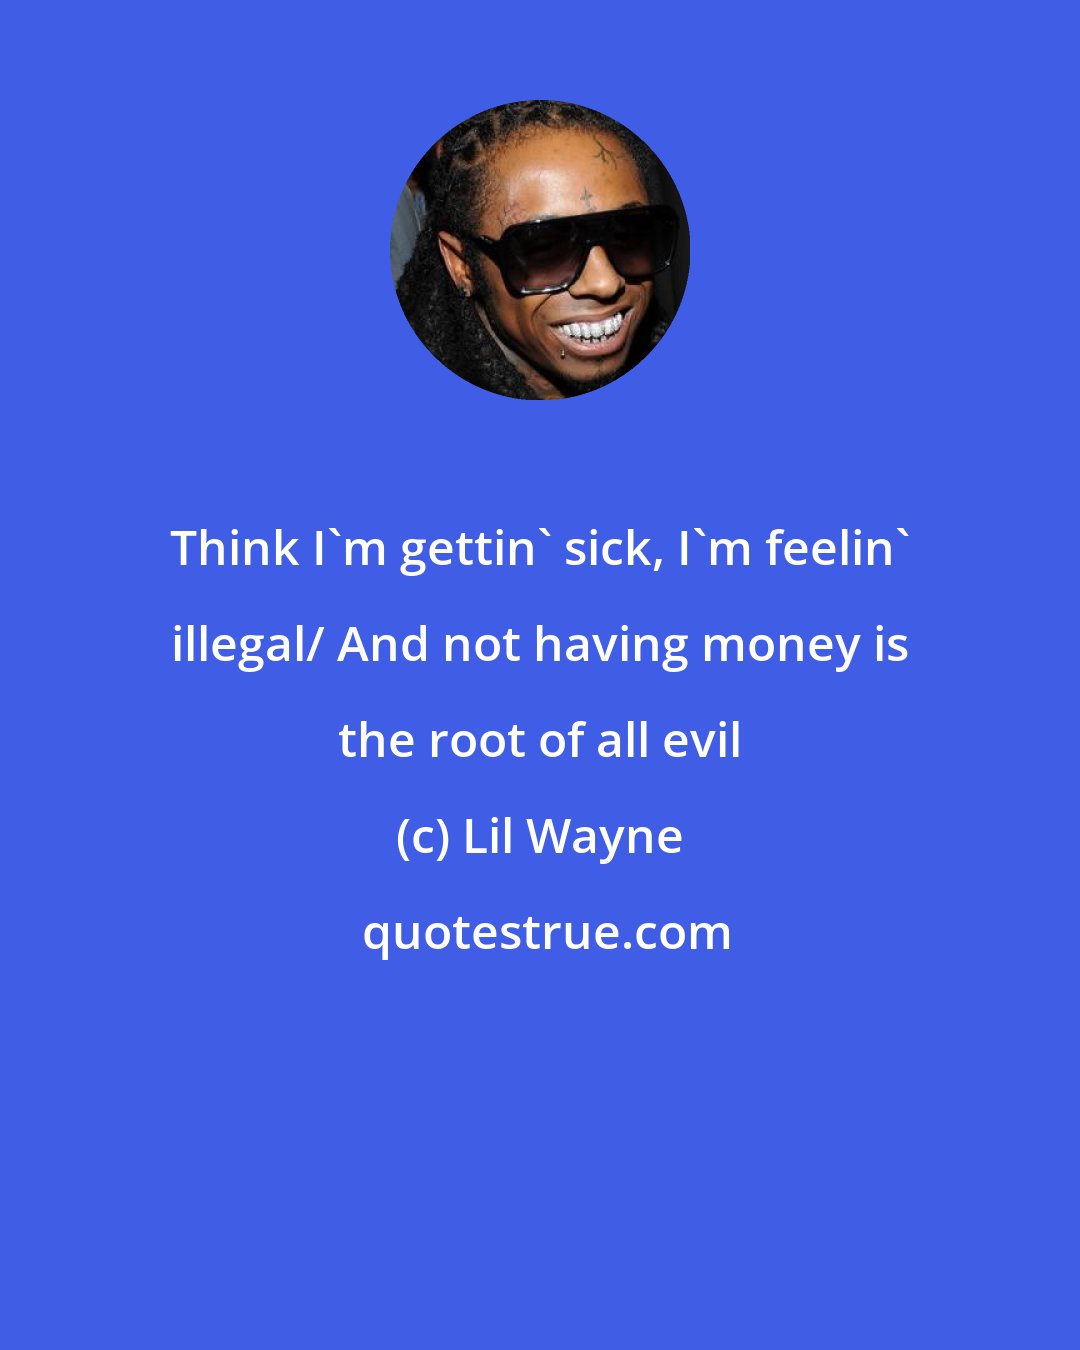 Lil Wayne: Think I'm gettin' sick, I'm feelin' illegal/ And not having money is the root of all evil